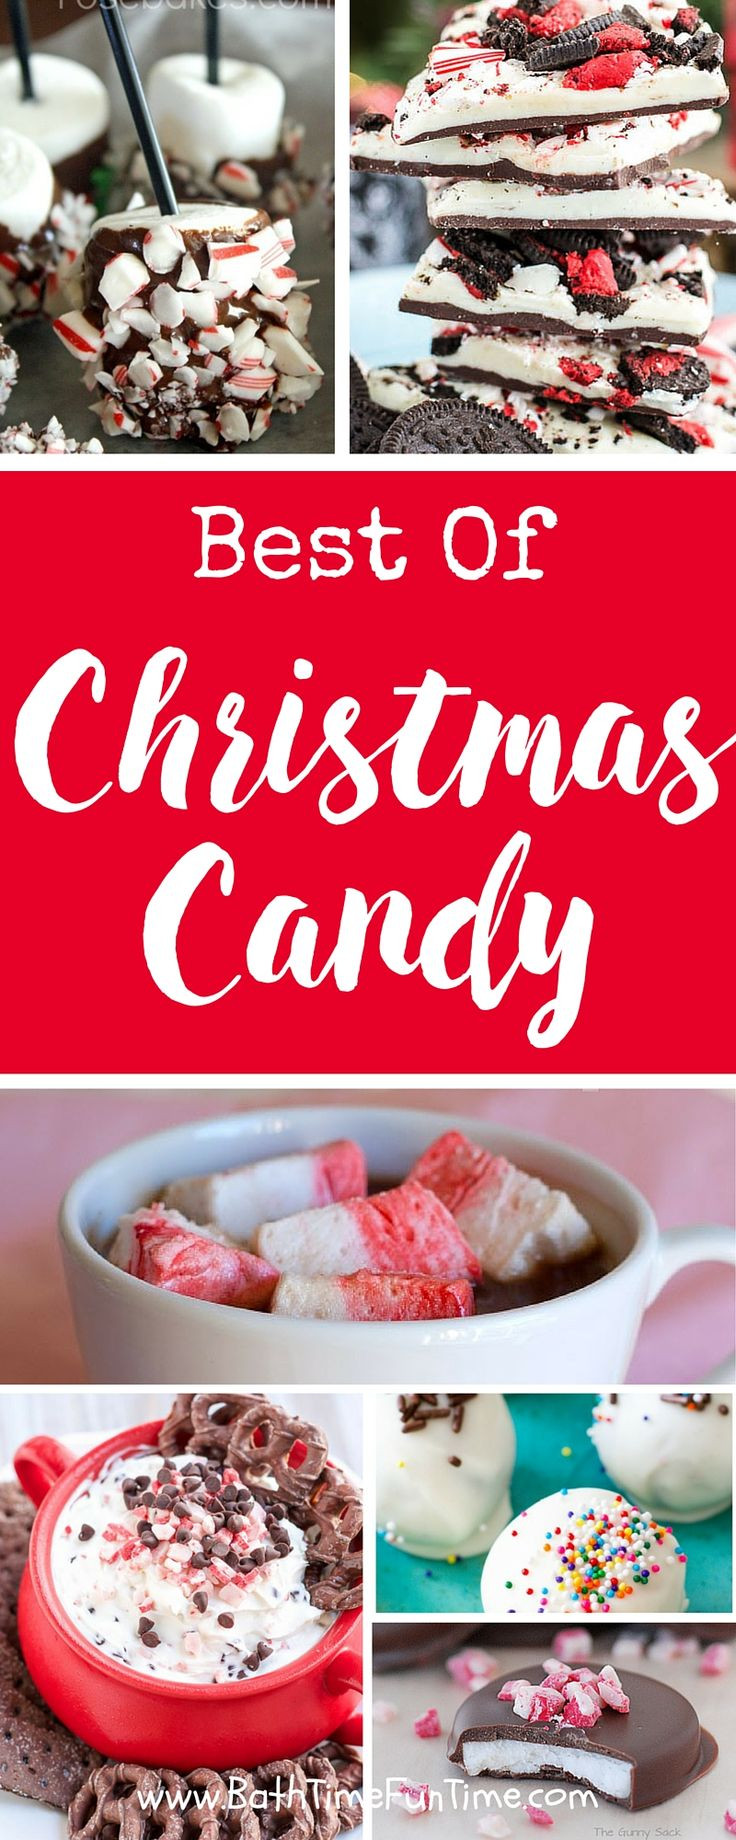 Best Christmas Candy
 1000 images about Best of BathTimeFunTime on